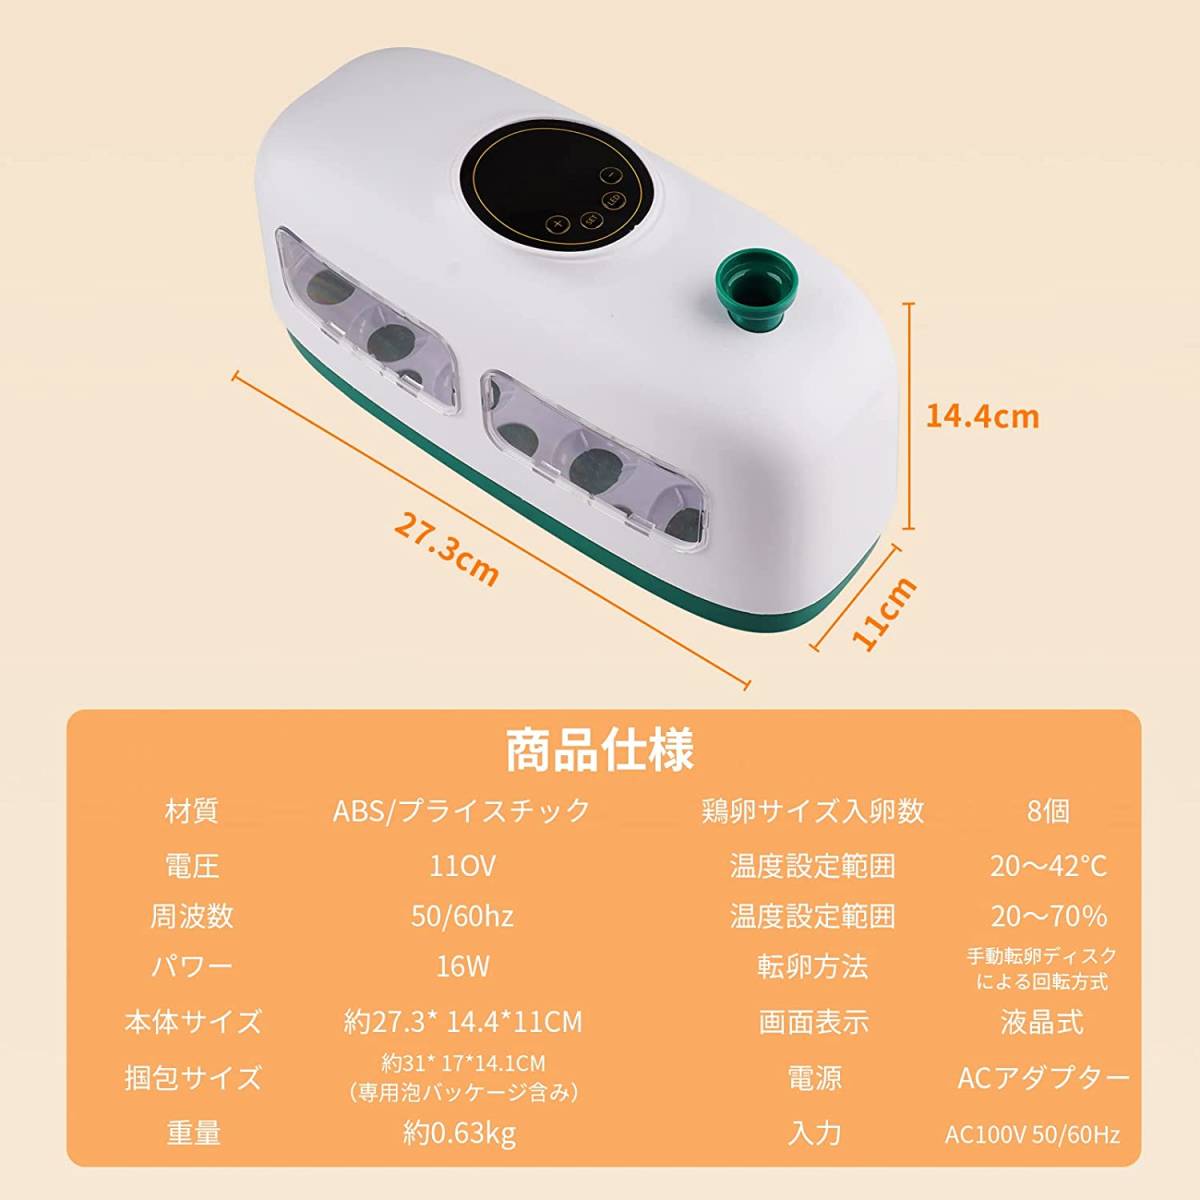  automatic . egg vessel in kyu Beta -8 piece automatic temperature control . egg vessel attaching digital display manual rotation egg child education for home use low noise chicken etc. house . exclusive use . egg vessel 